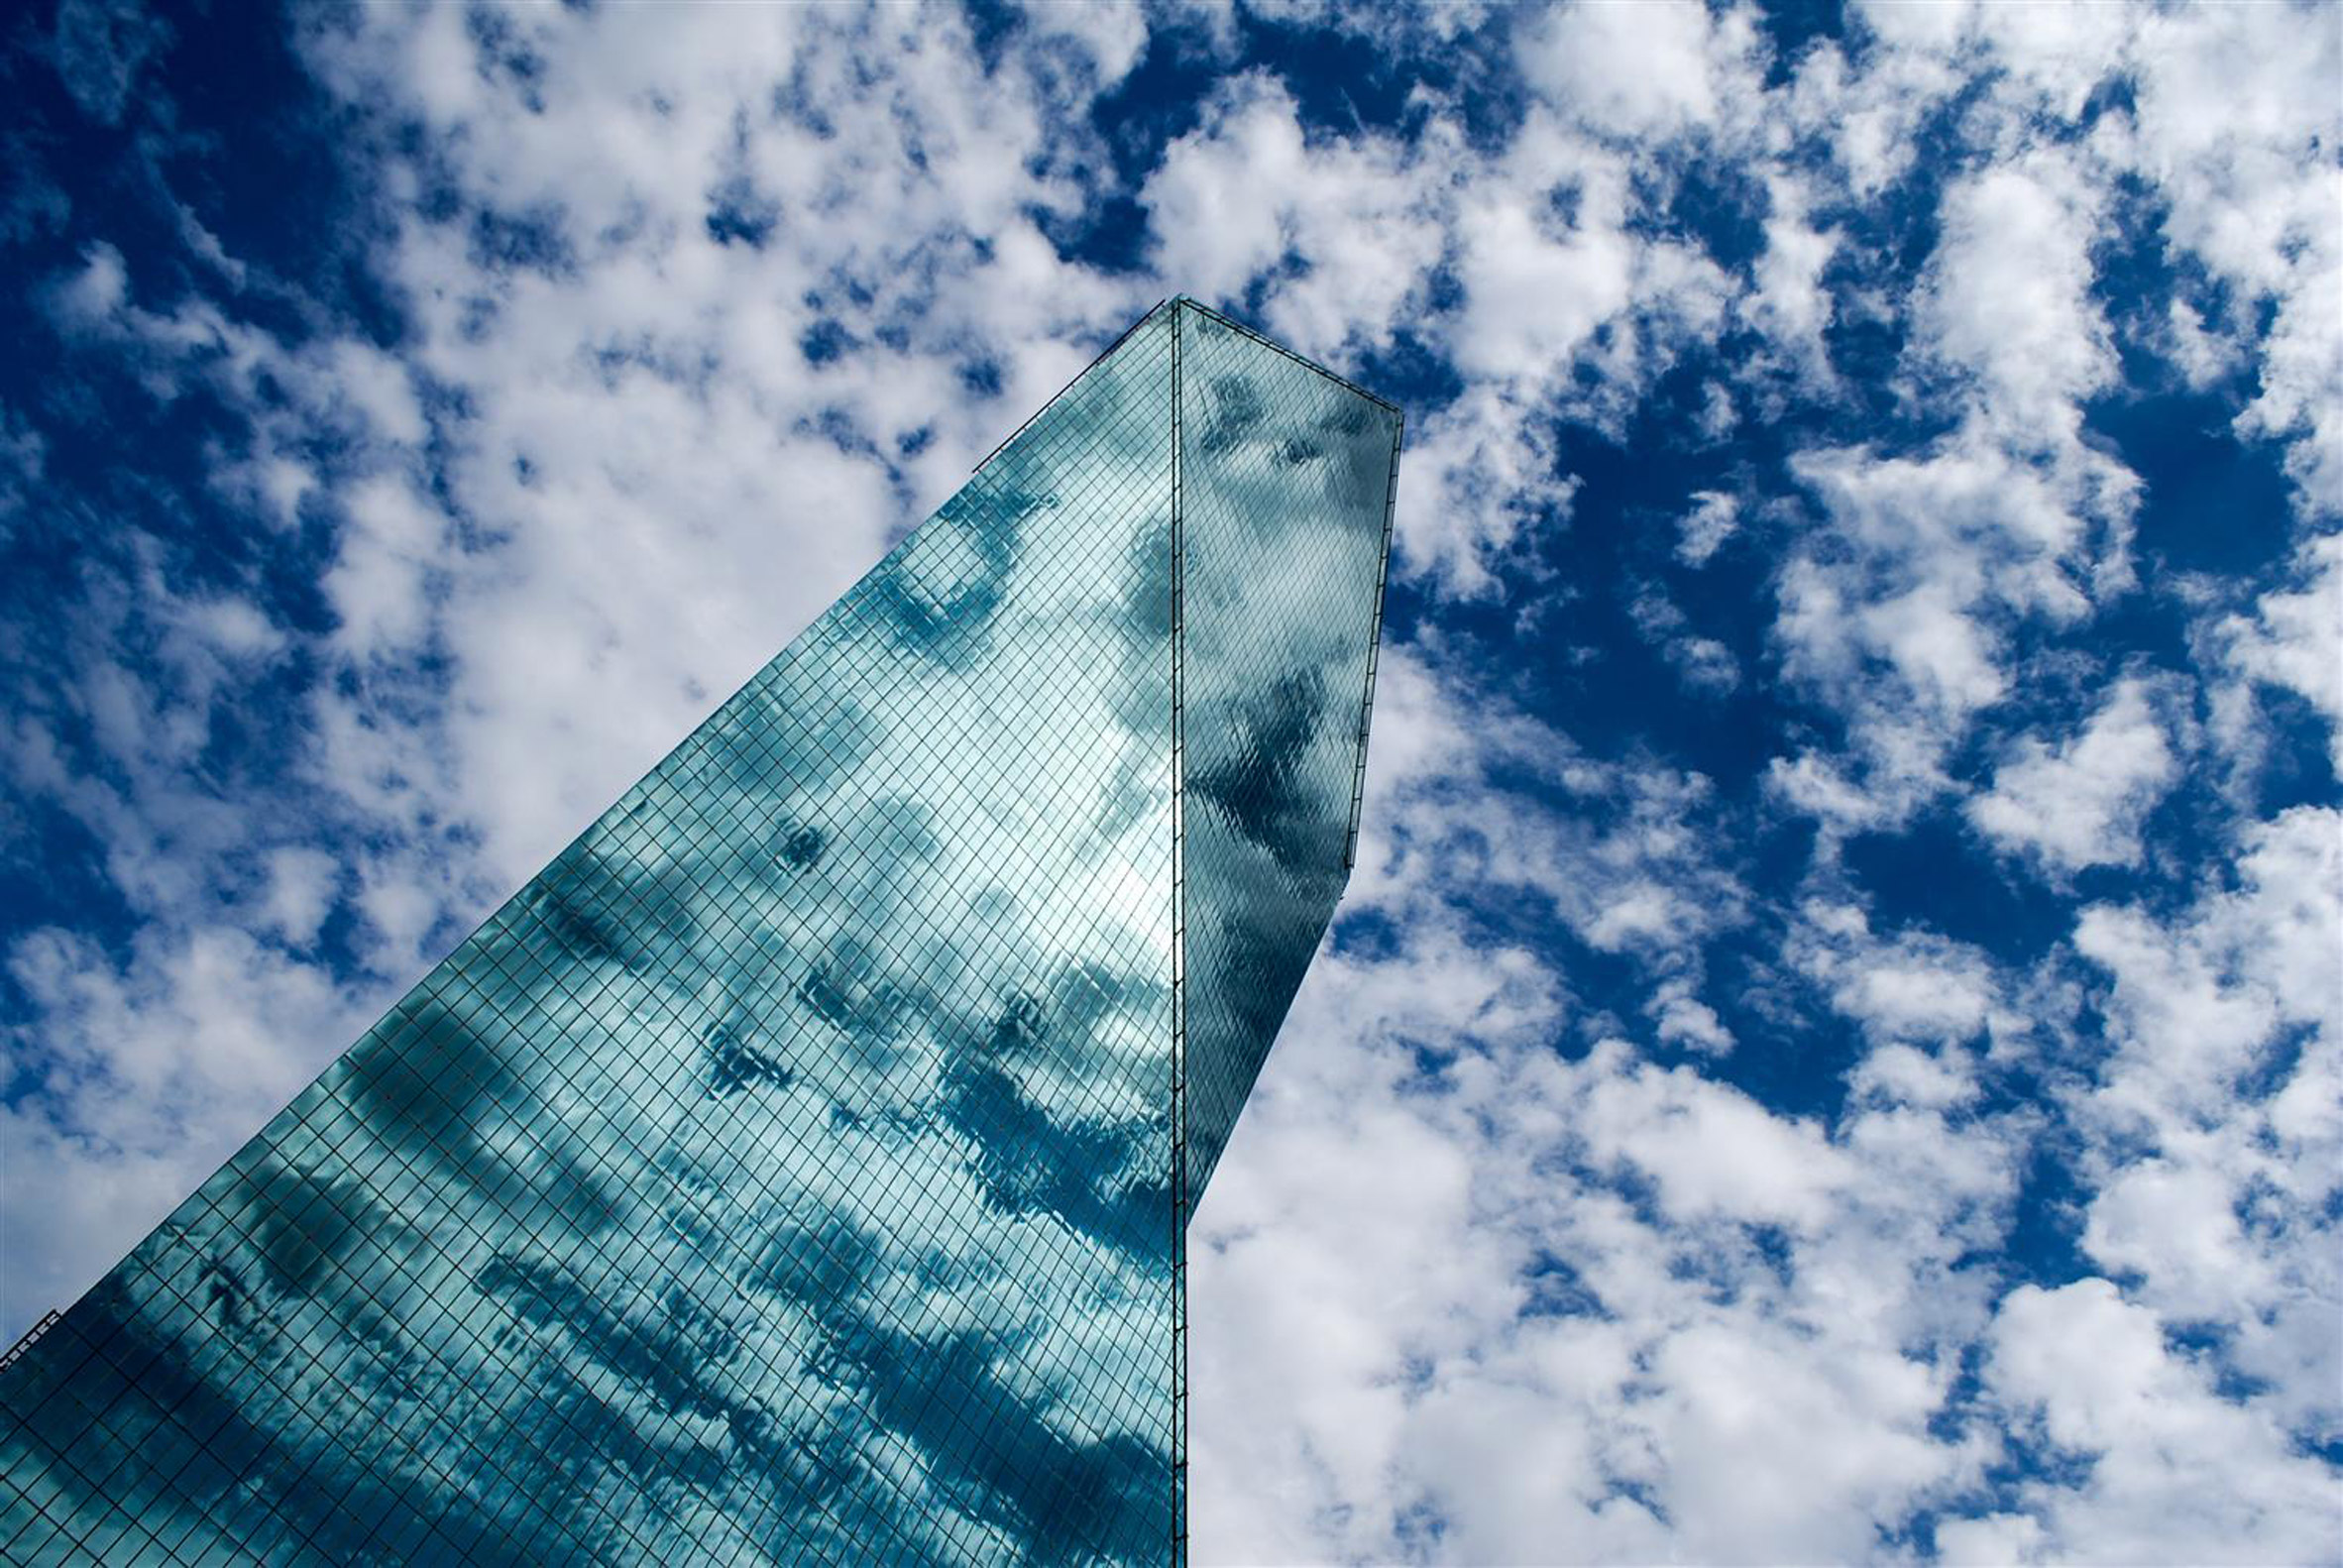 The sky is used as inspiration for Structure Photography